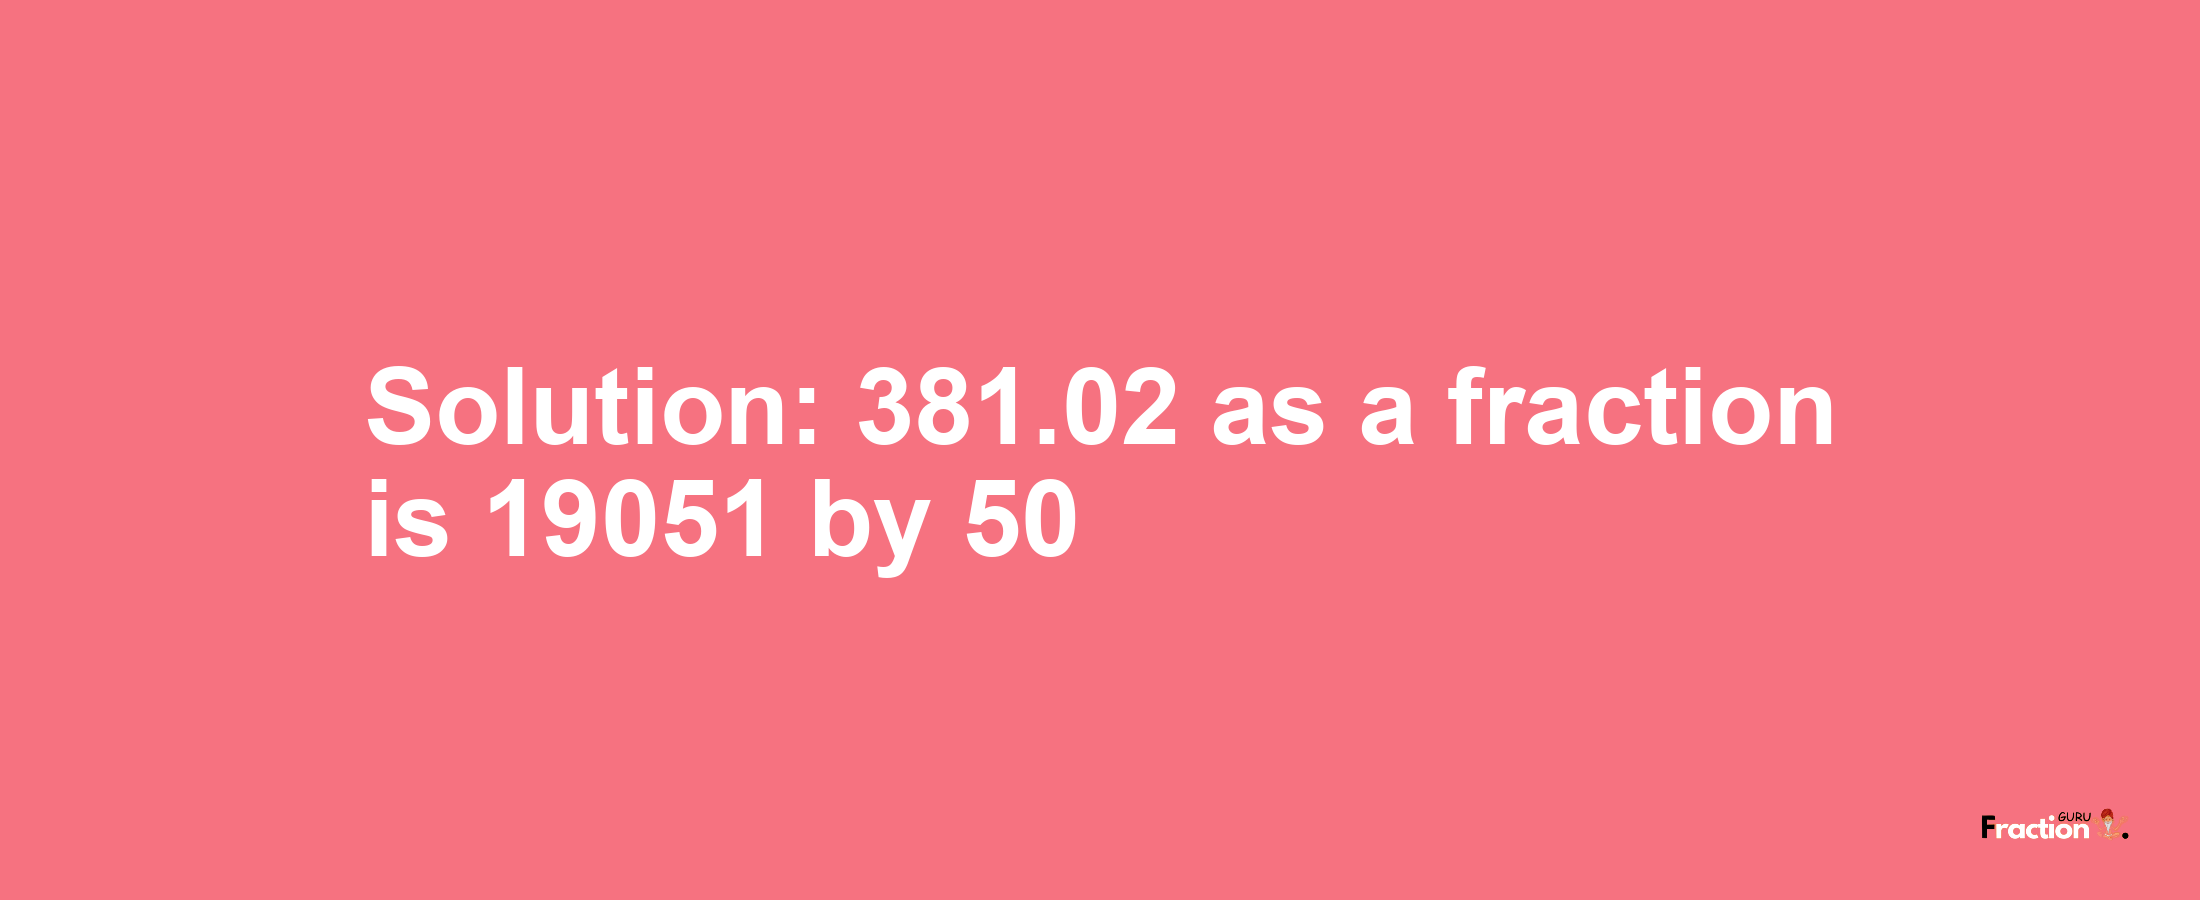 Solution:381.02 as a fraction is 19051/50